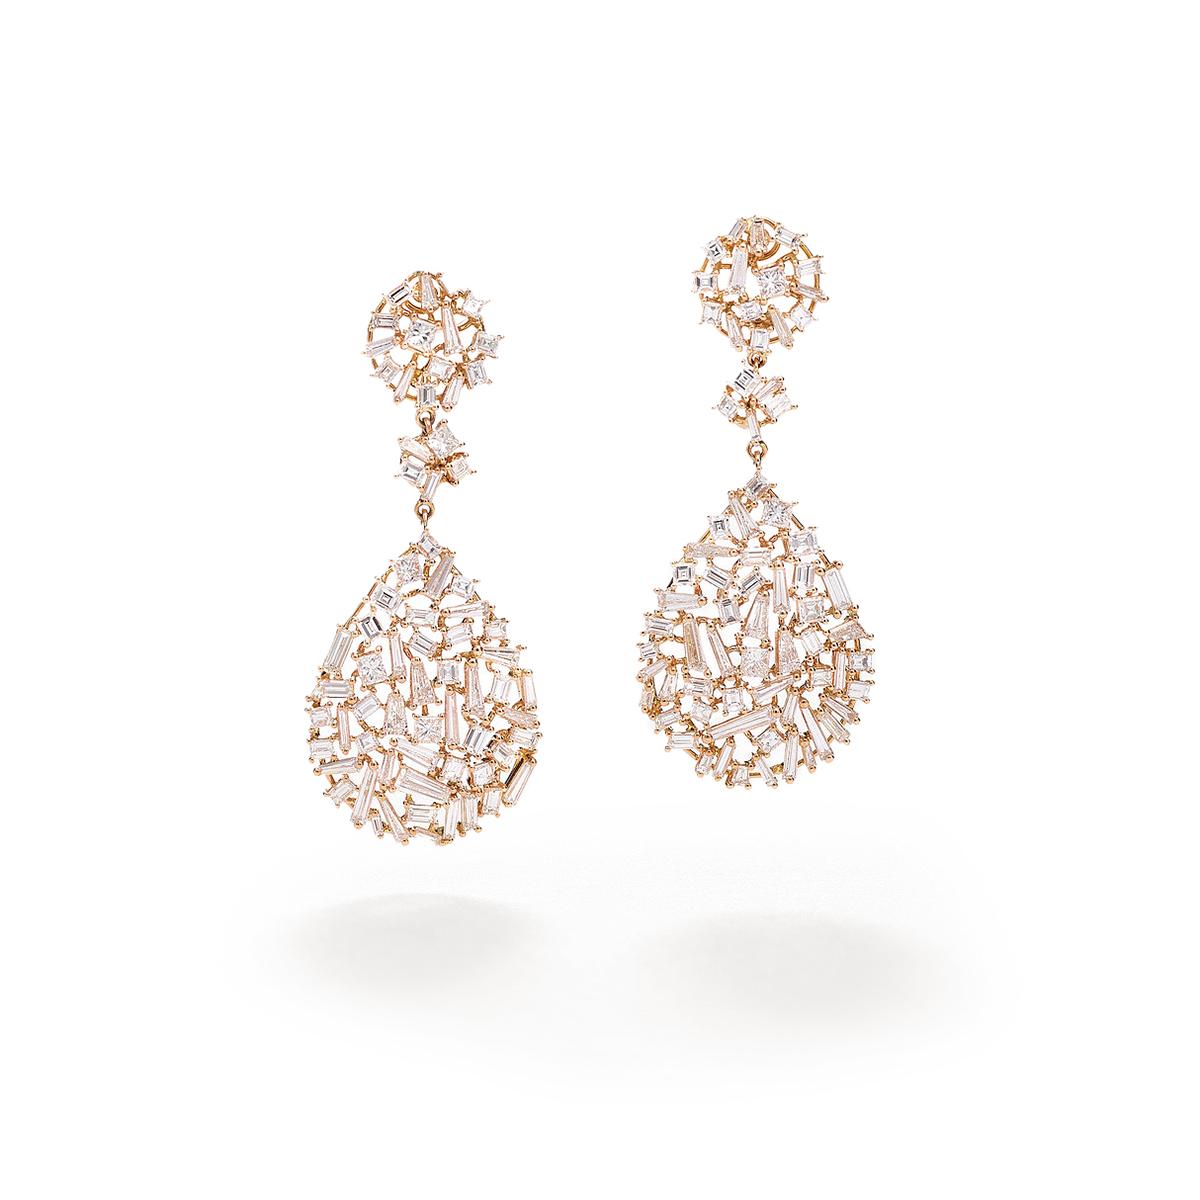 Earrings in 18kt pink gold set with 139 baguette, princess, tapers cut diamonds 7.61 cts      